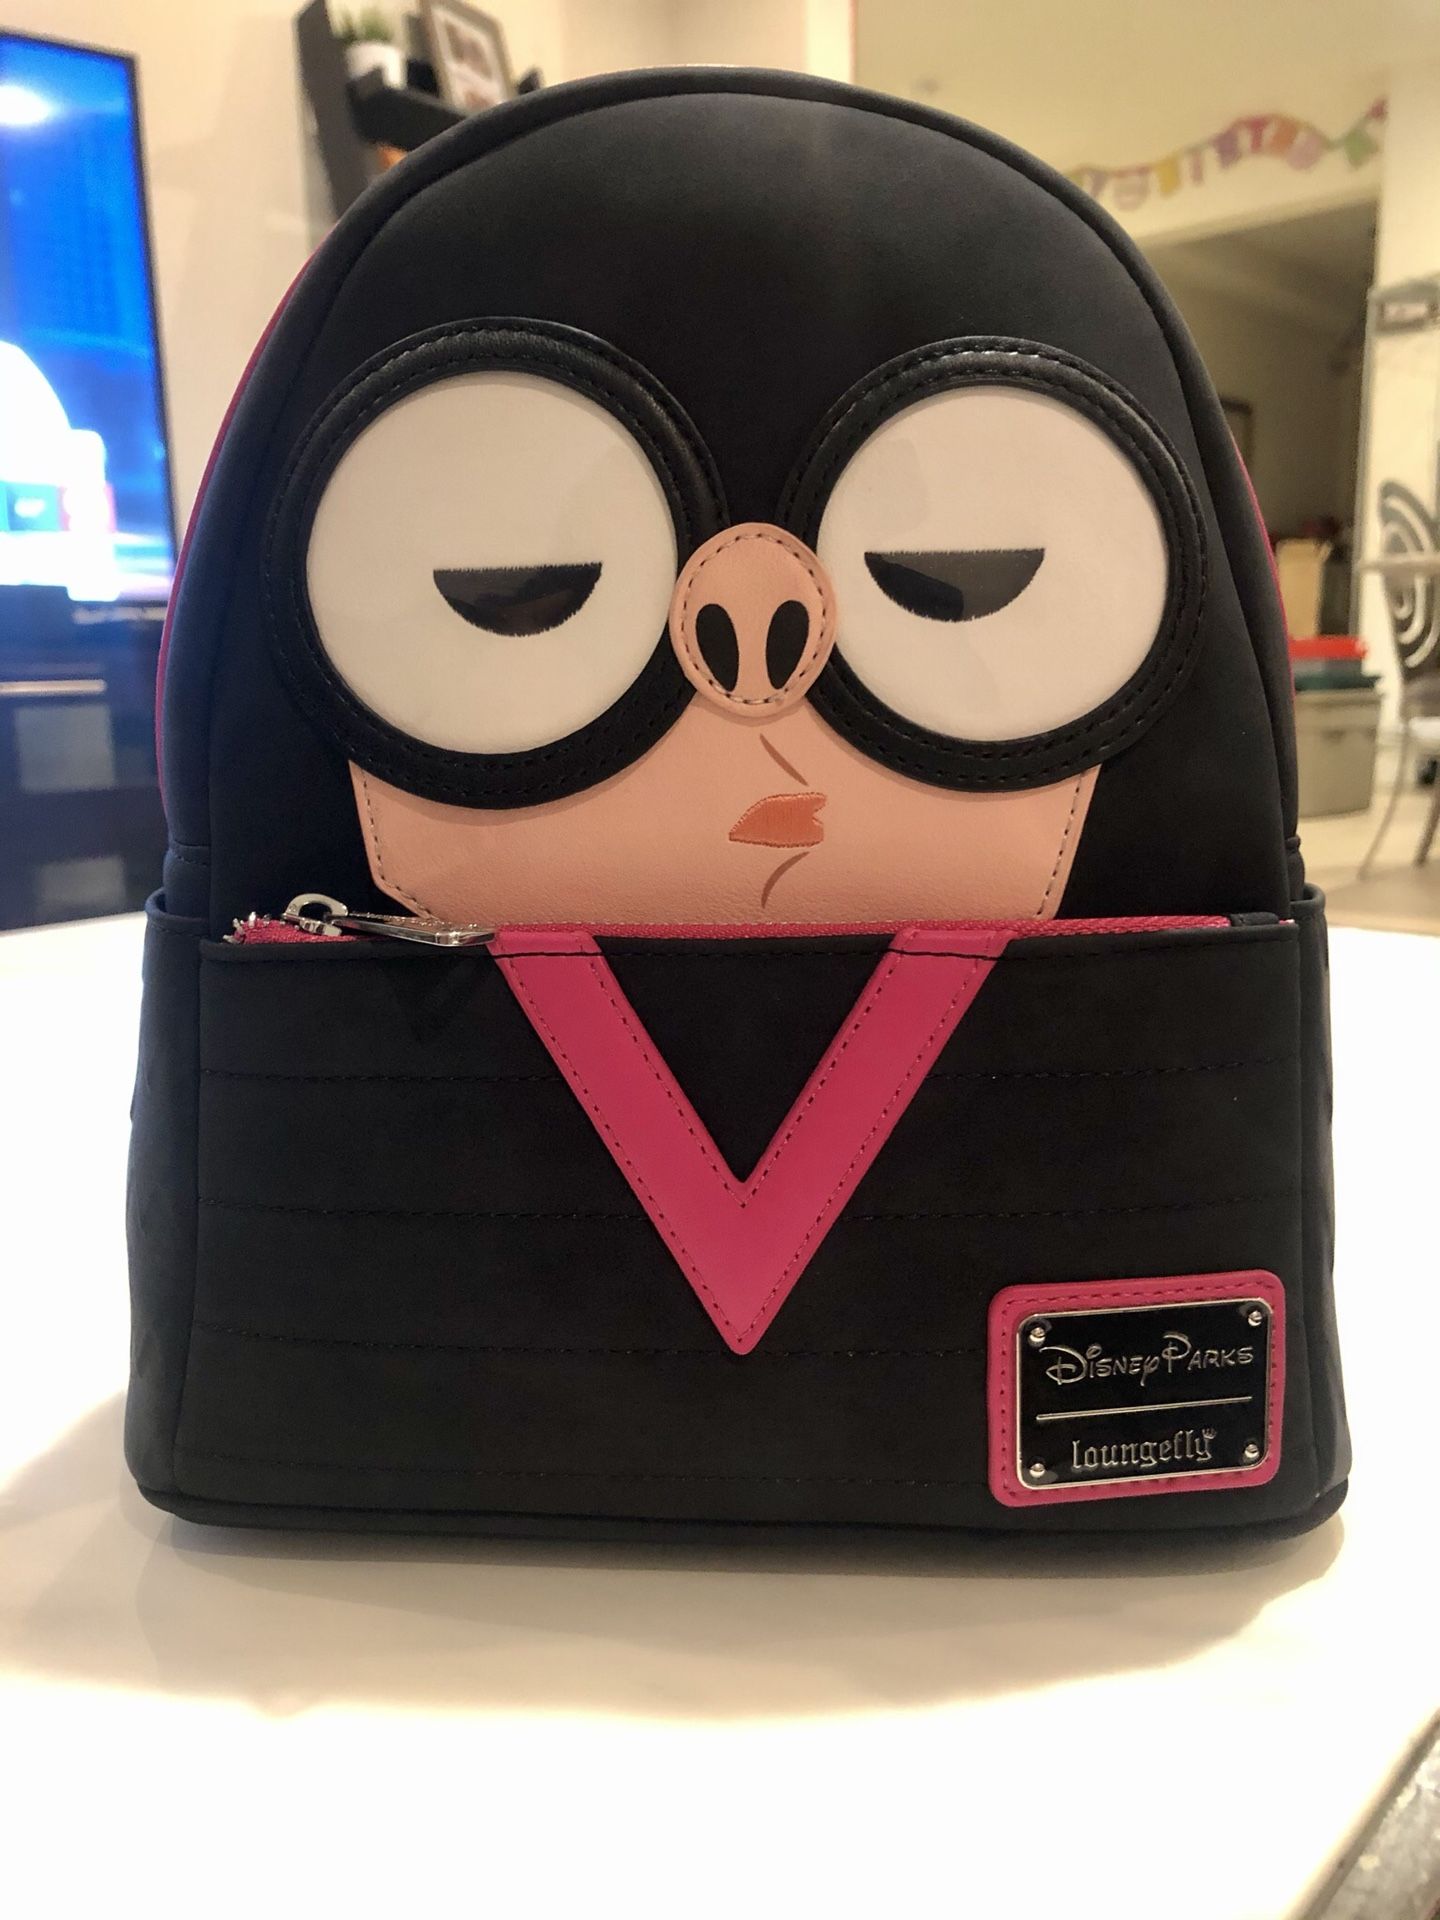 NWT Disney Loungefly incredible d "Edna Mode"back pack